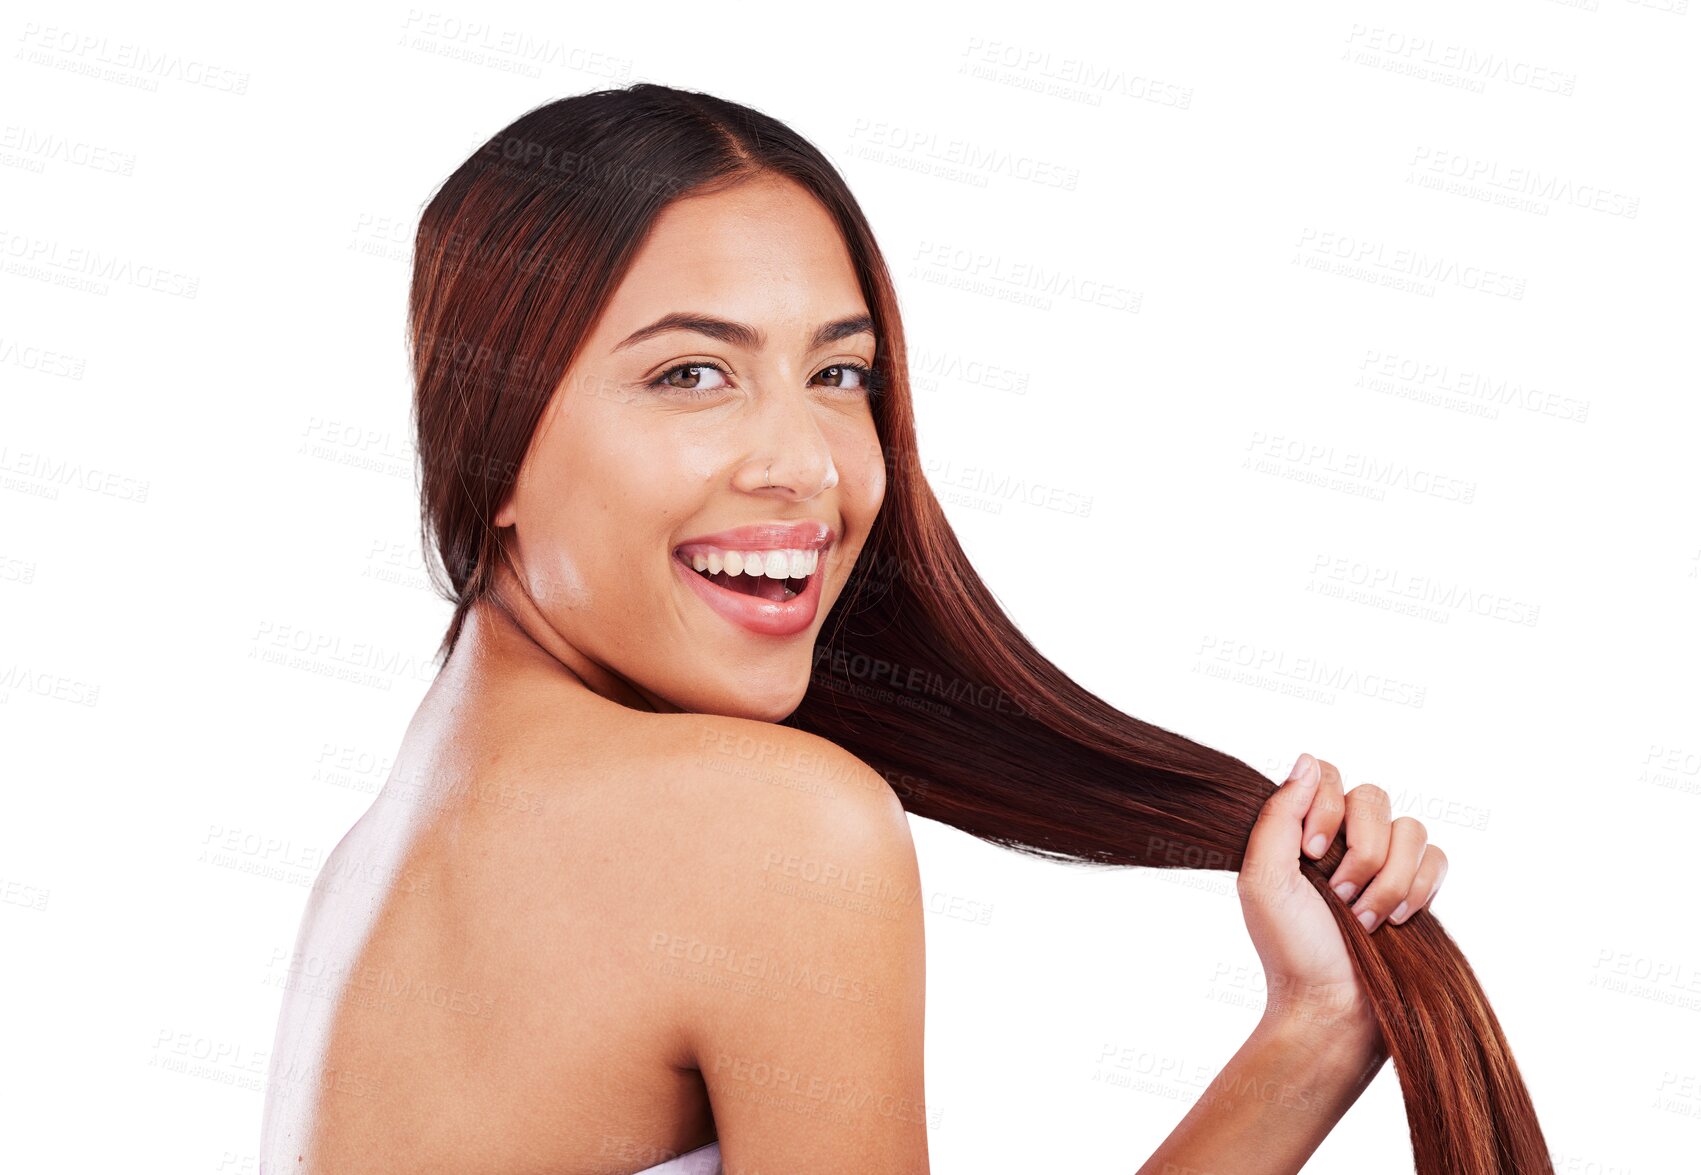 Buy stock photo Hair care, happy and portrait of woman with beauty on isolated, png and transparent background. Cosmetics, hairdresser salon and face of person with hairstyle for shine, keratin and healthy texture